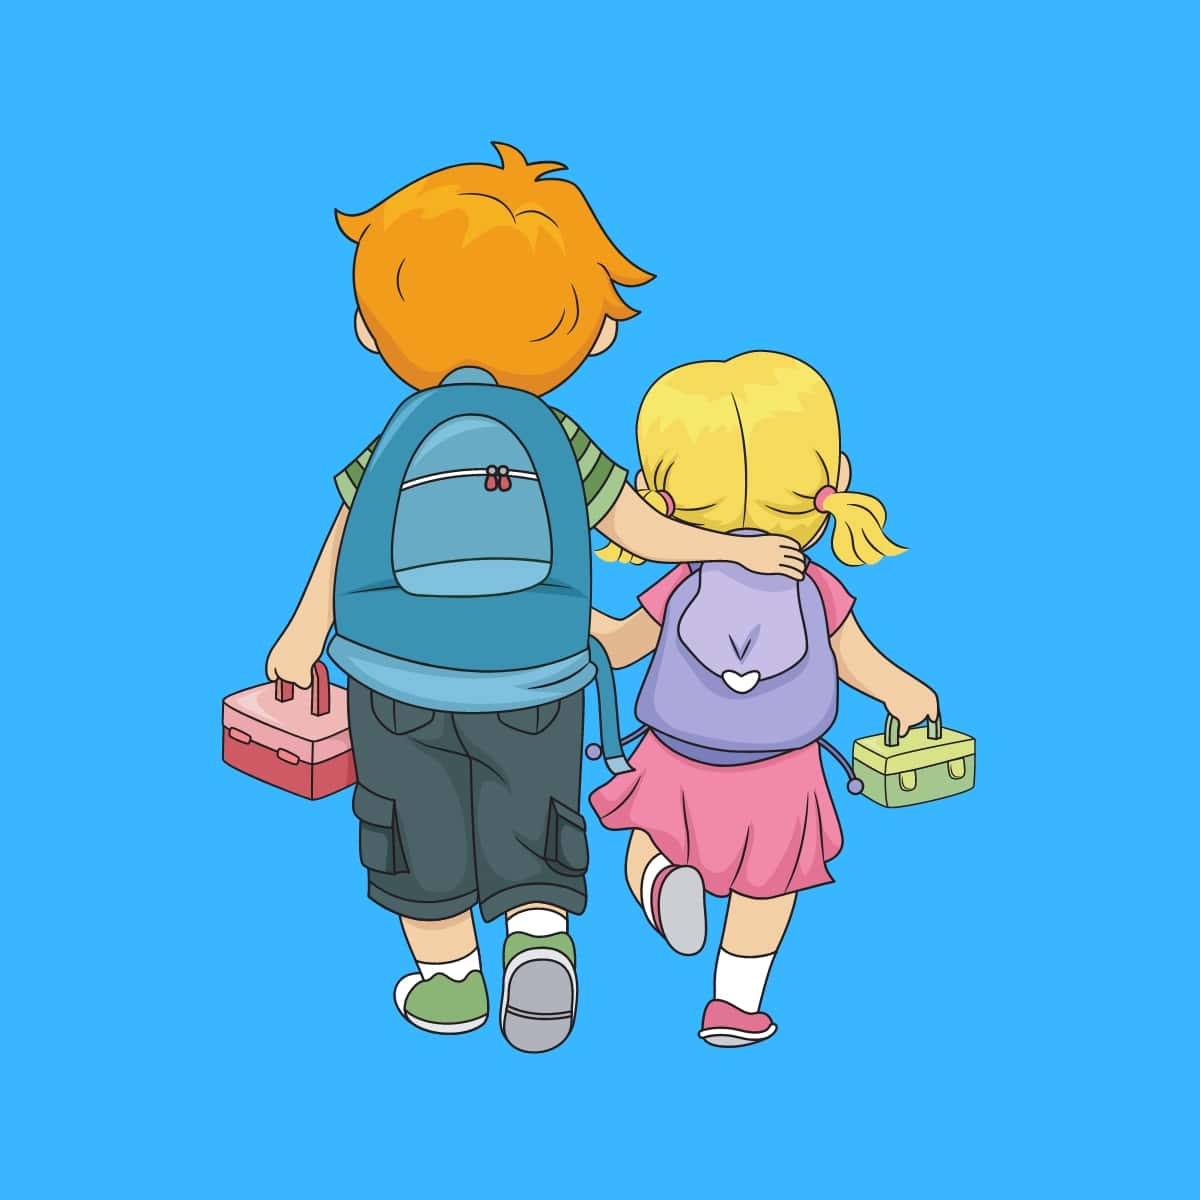 Cartoon graphic of two siblings walking together with their bags on a blue background.